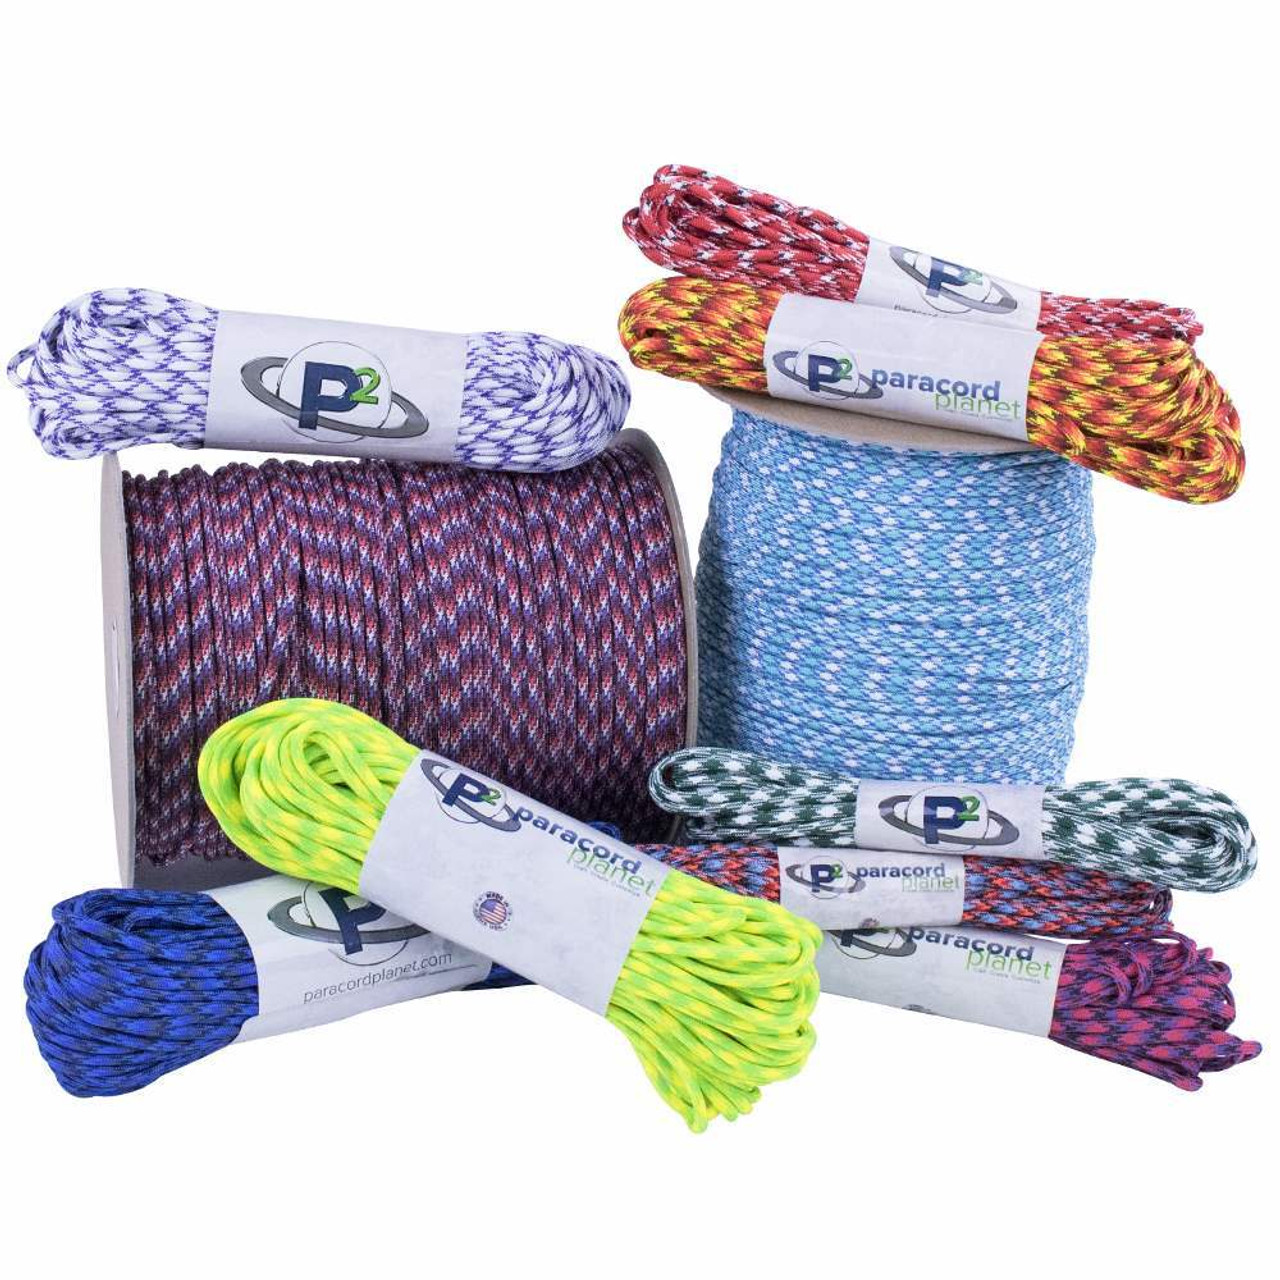 Paracord Planet Brand 550 lb Type III Commercial Grade Parachute Cord - Royal Blue 50 Feet - USA Made, Size: 50', Multicolor